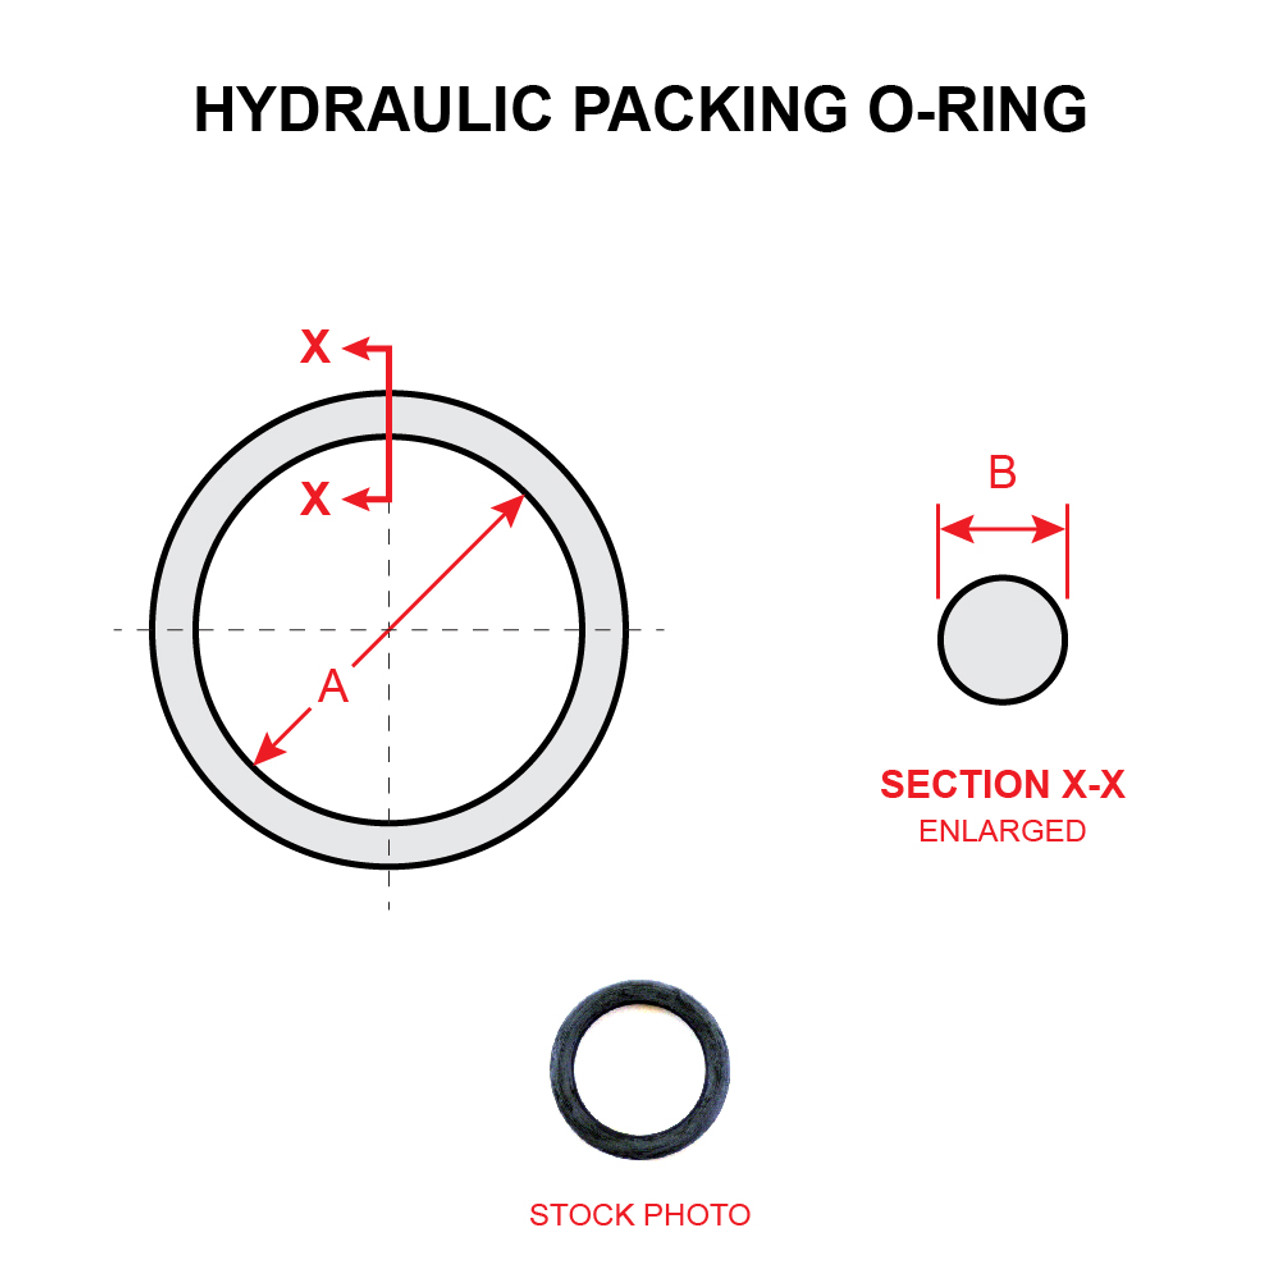 MS28775-245   HYDRAULIC PACKING O-RING